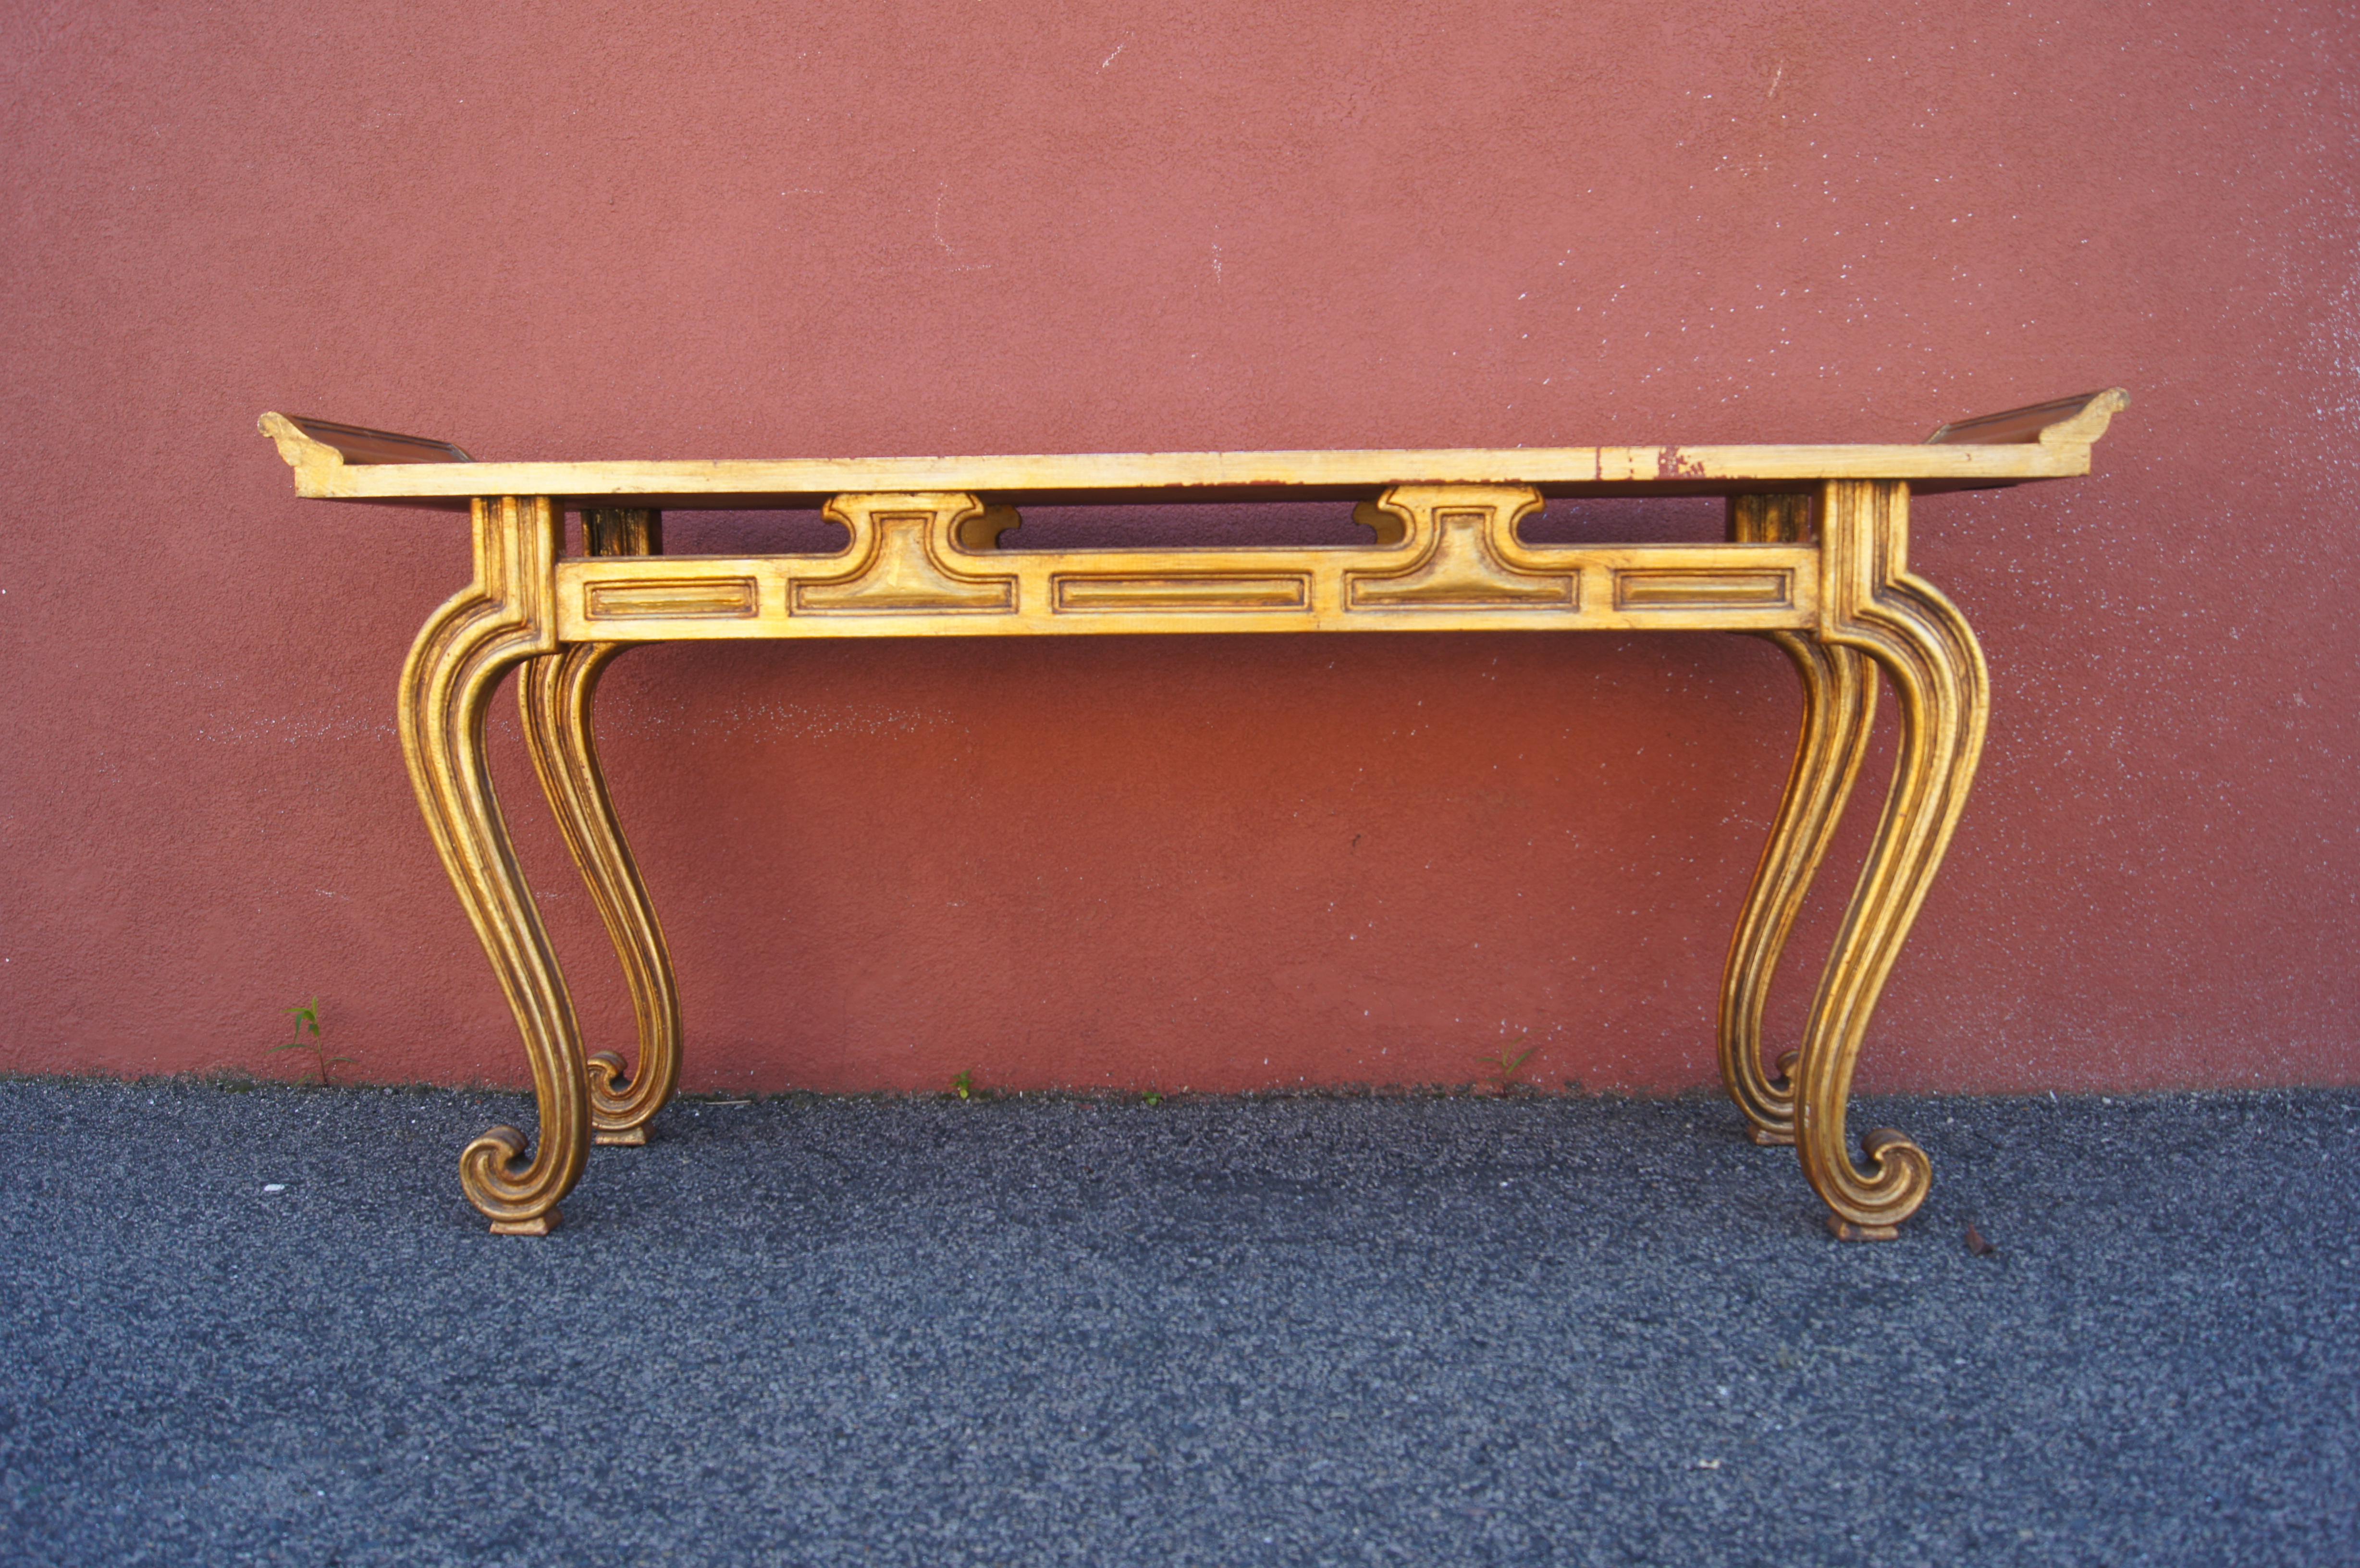 This console table is a 1950s interpretation of the altar tables traditionally found in Chinese reception halls. The gilt-painted wood frame features the typical everted flanges and scrolled legs; the table surface is gold-specked mirror.

The